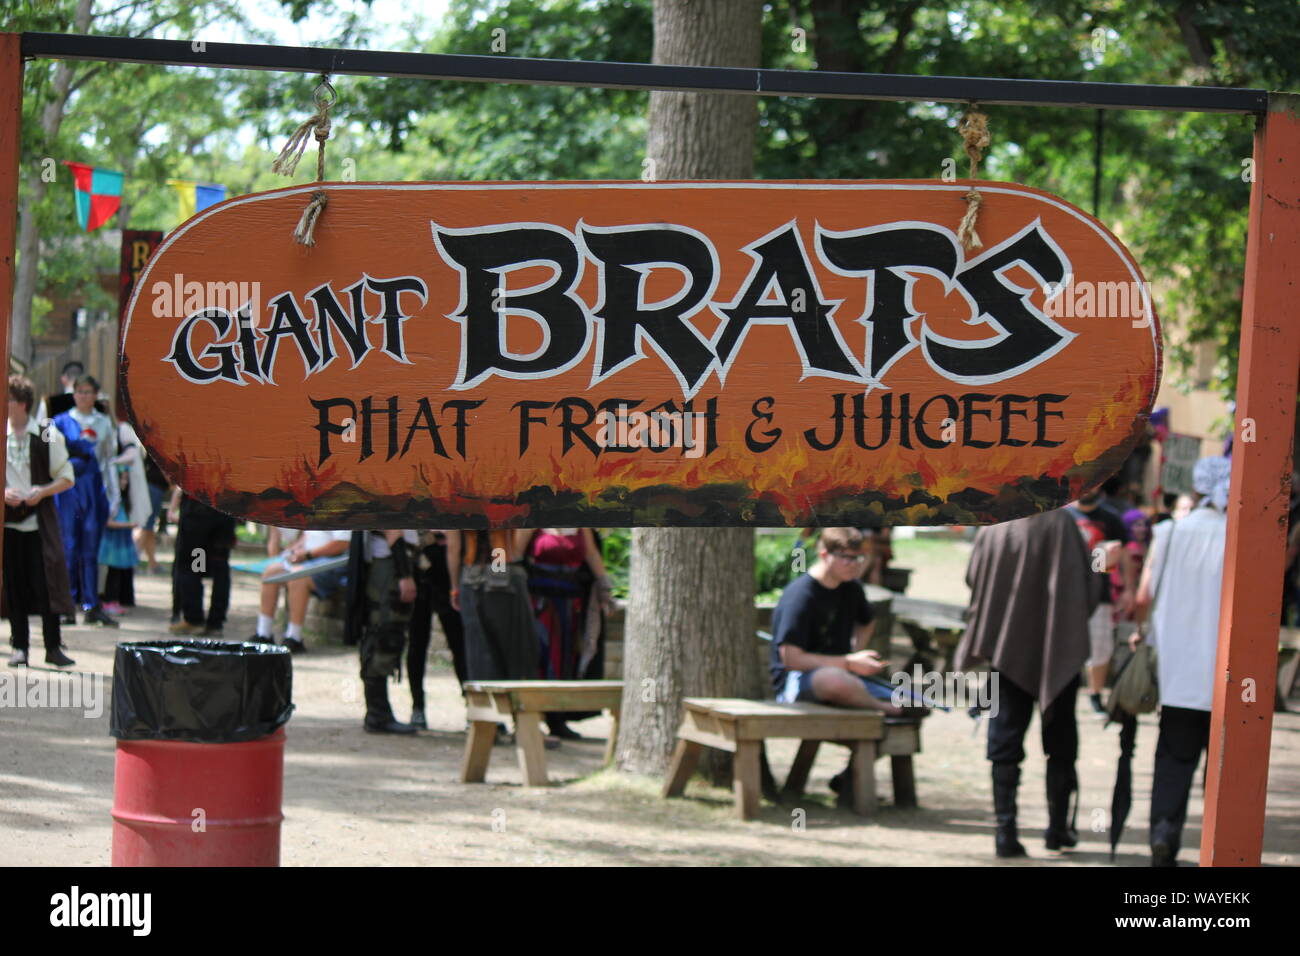 Giant brats, phat, fresh and juicy sign at the Bristol Renaissance Faire, feire, feyre, faire, and fayre, Mittelaltermarkt, Mercats Medievals. Stock Photo